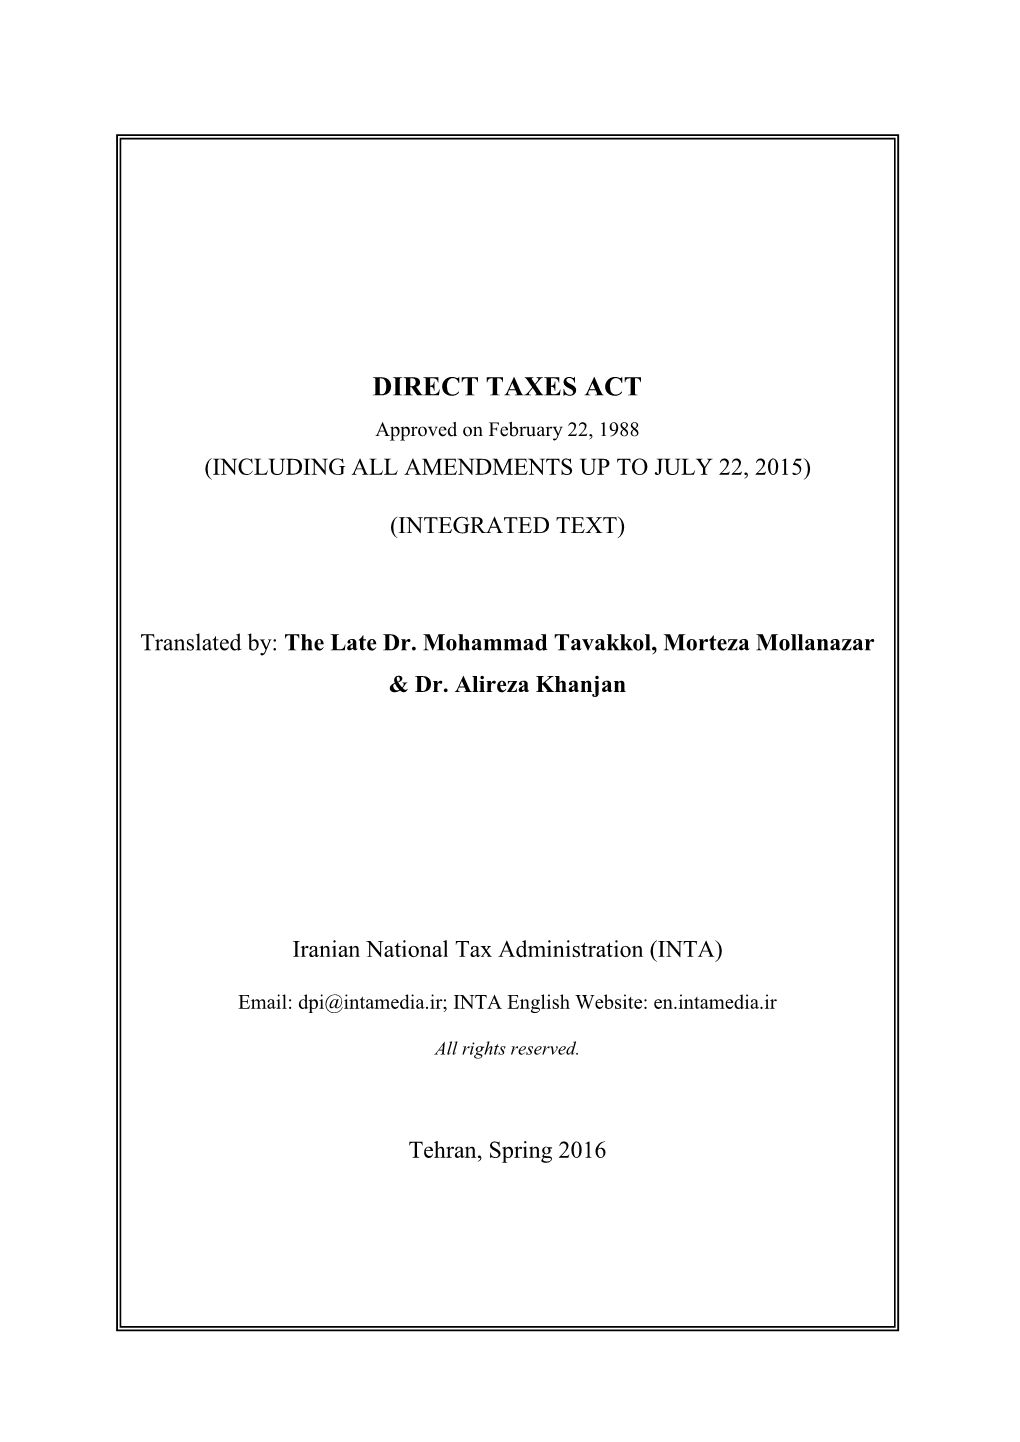 DIRECT TAXES ACT Approved on February 22, 1988 (INCLUDING ALL AMENDMENTS up to JULY 22, 2015)